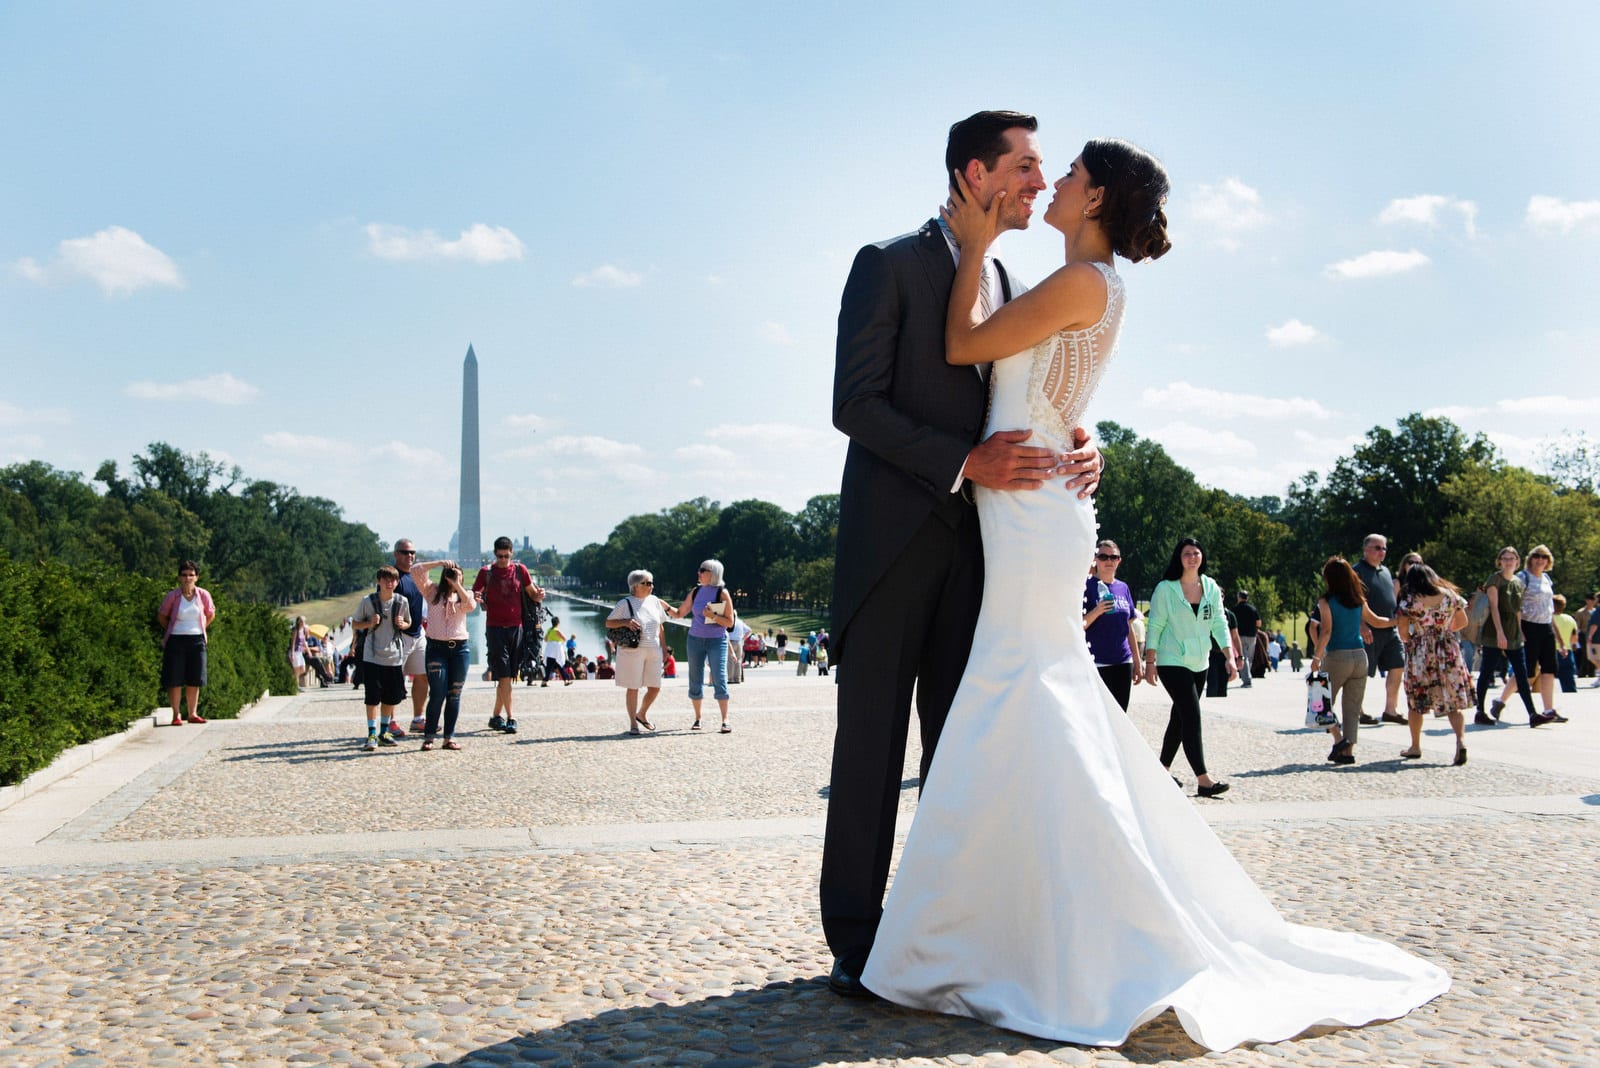 A bride and groom stand on the steps in front of the Lincoln memorial in Washington DC.